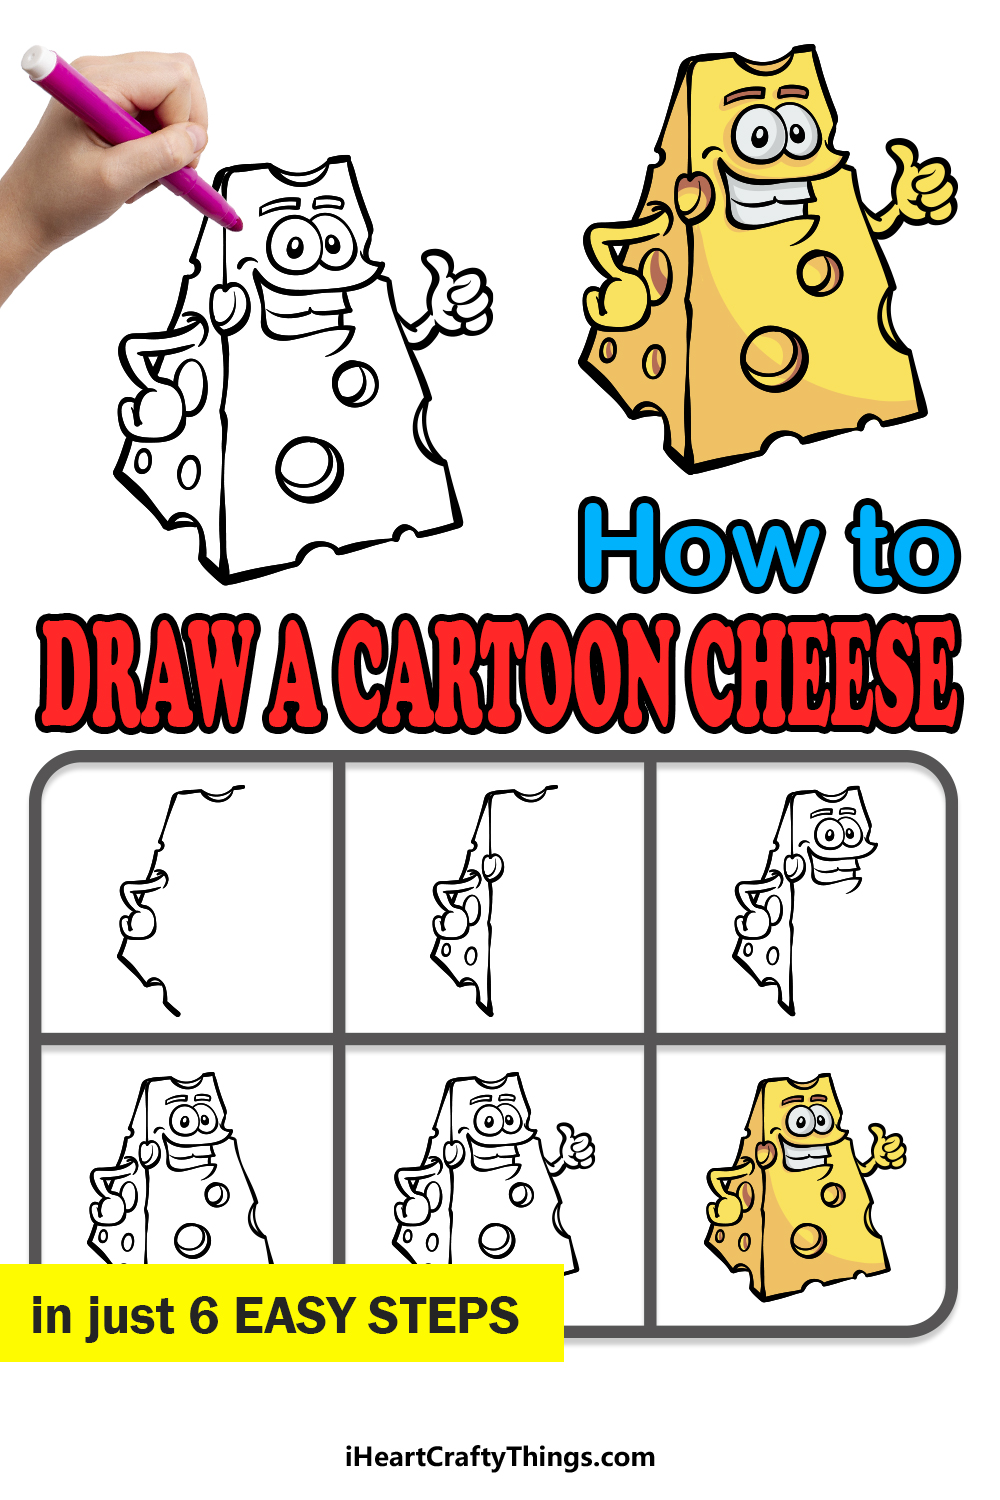 how to draw a cartoon cheese in 6 easy steps